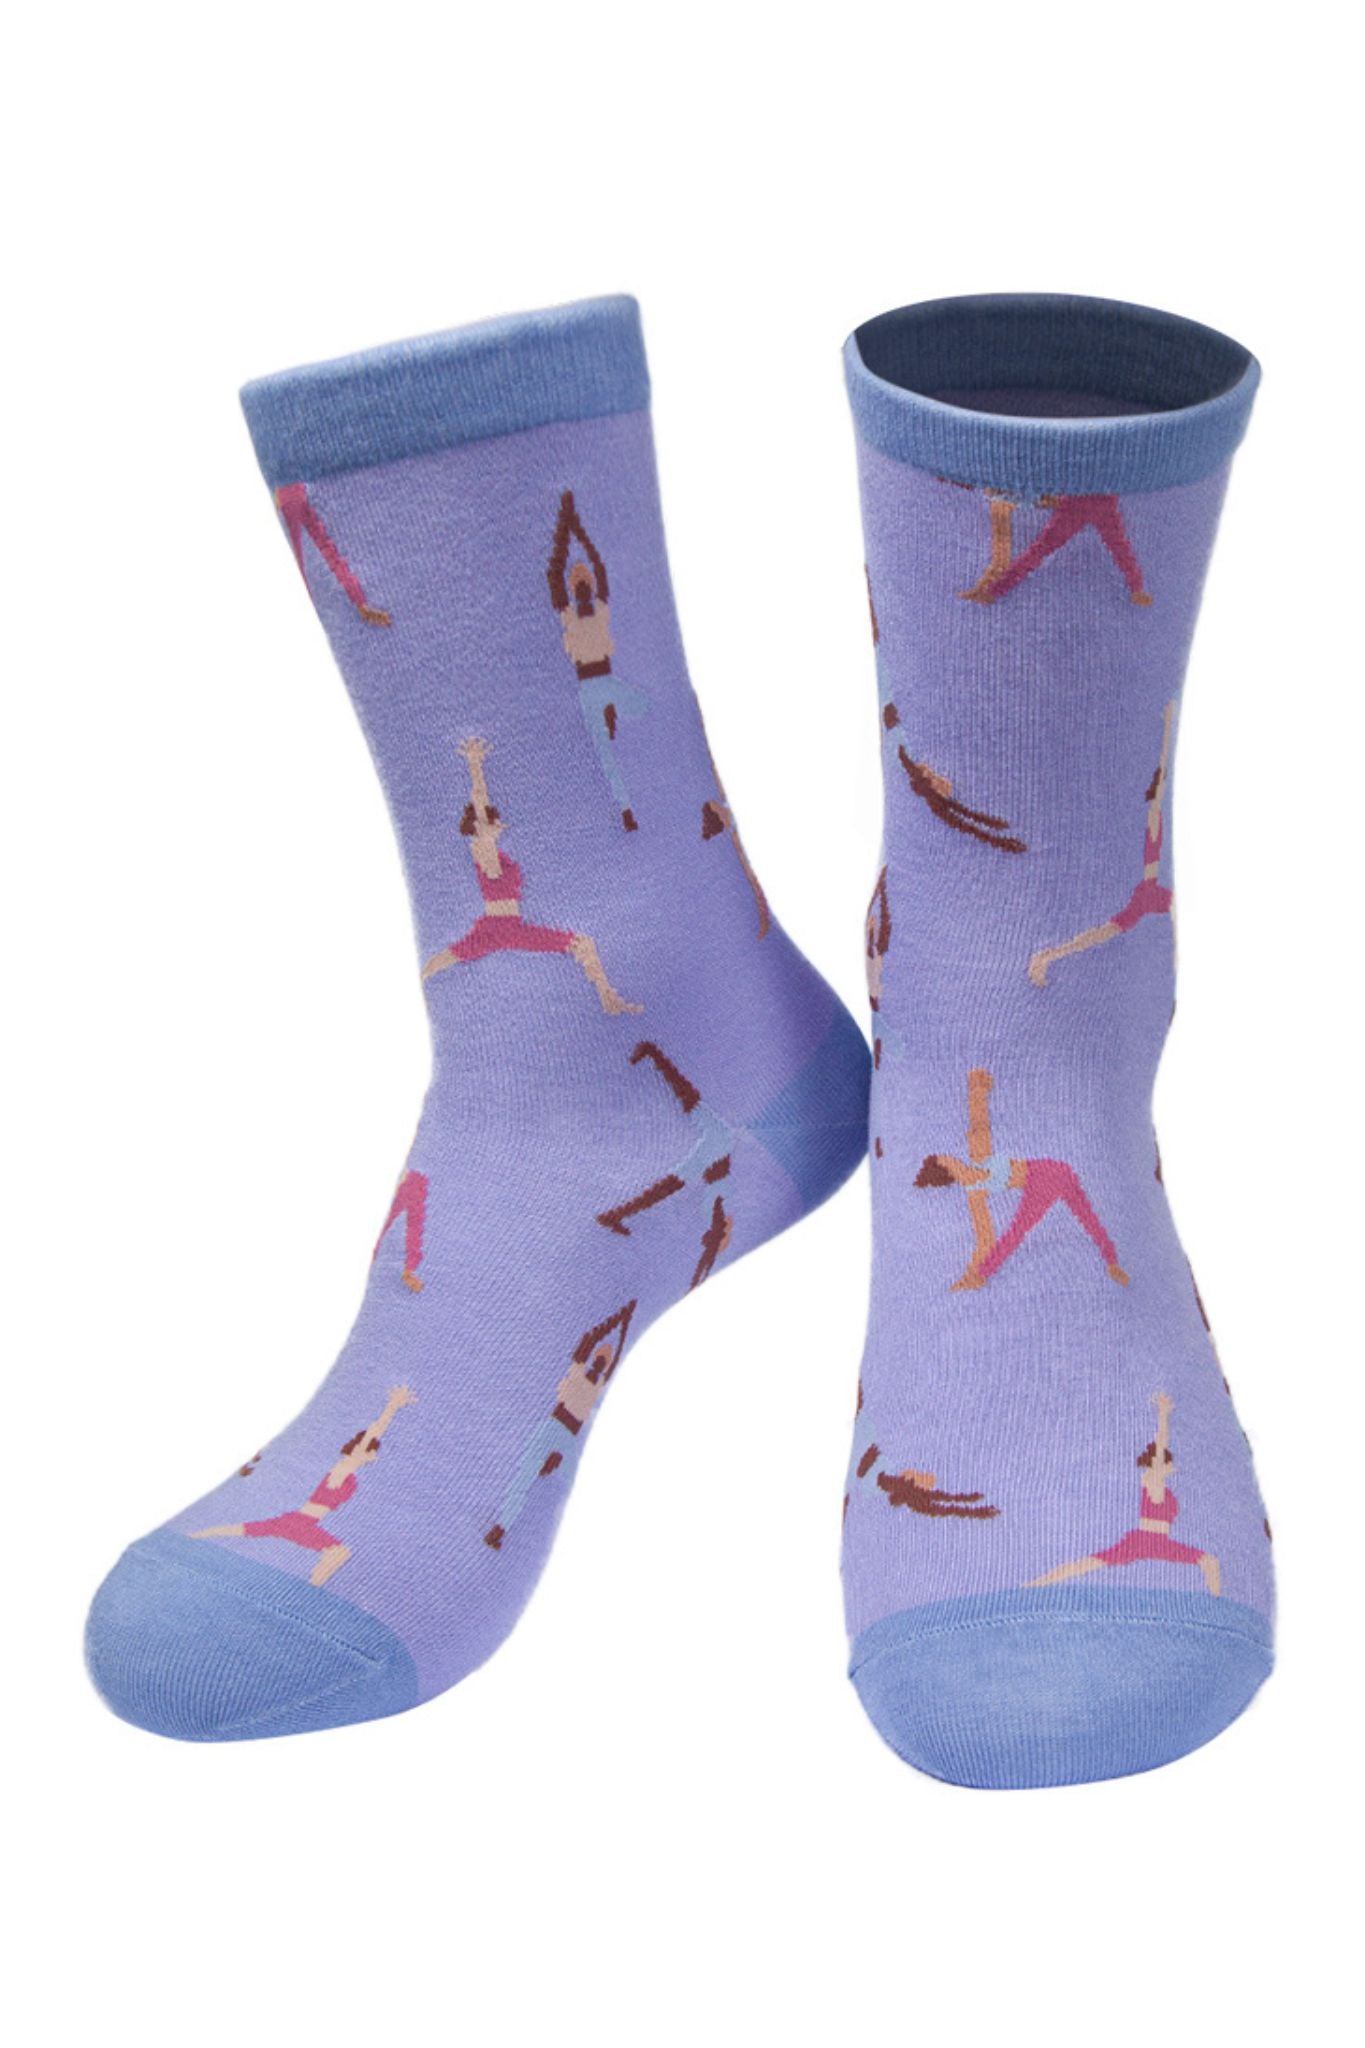 lilac bamboo ankle socks featuing women doing yoga poses